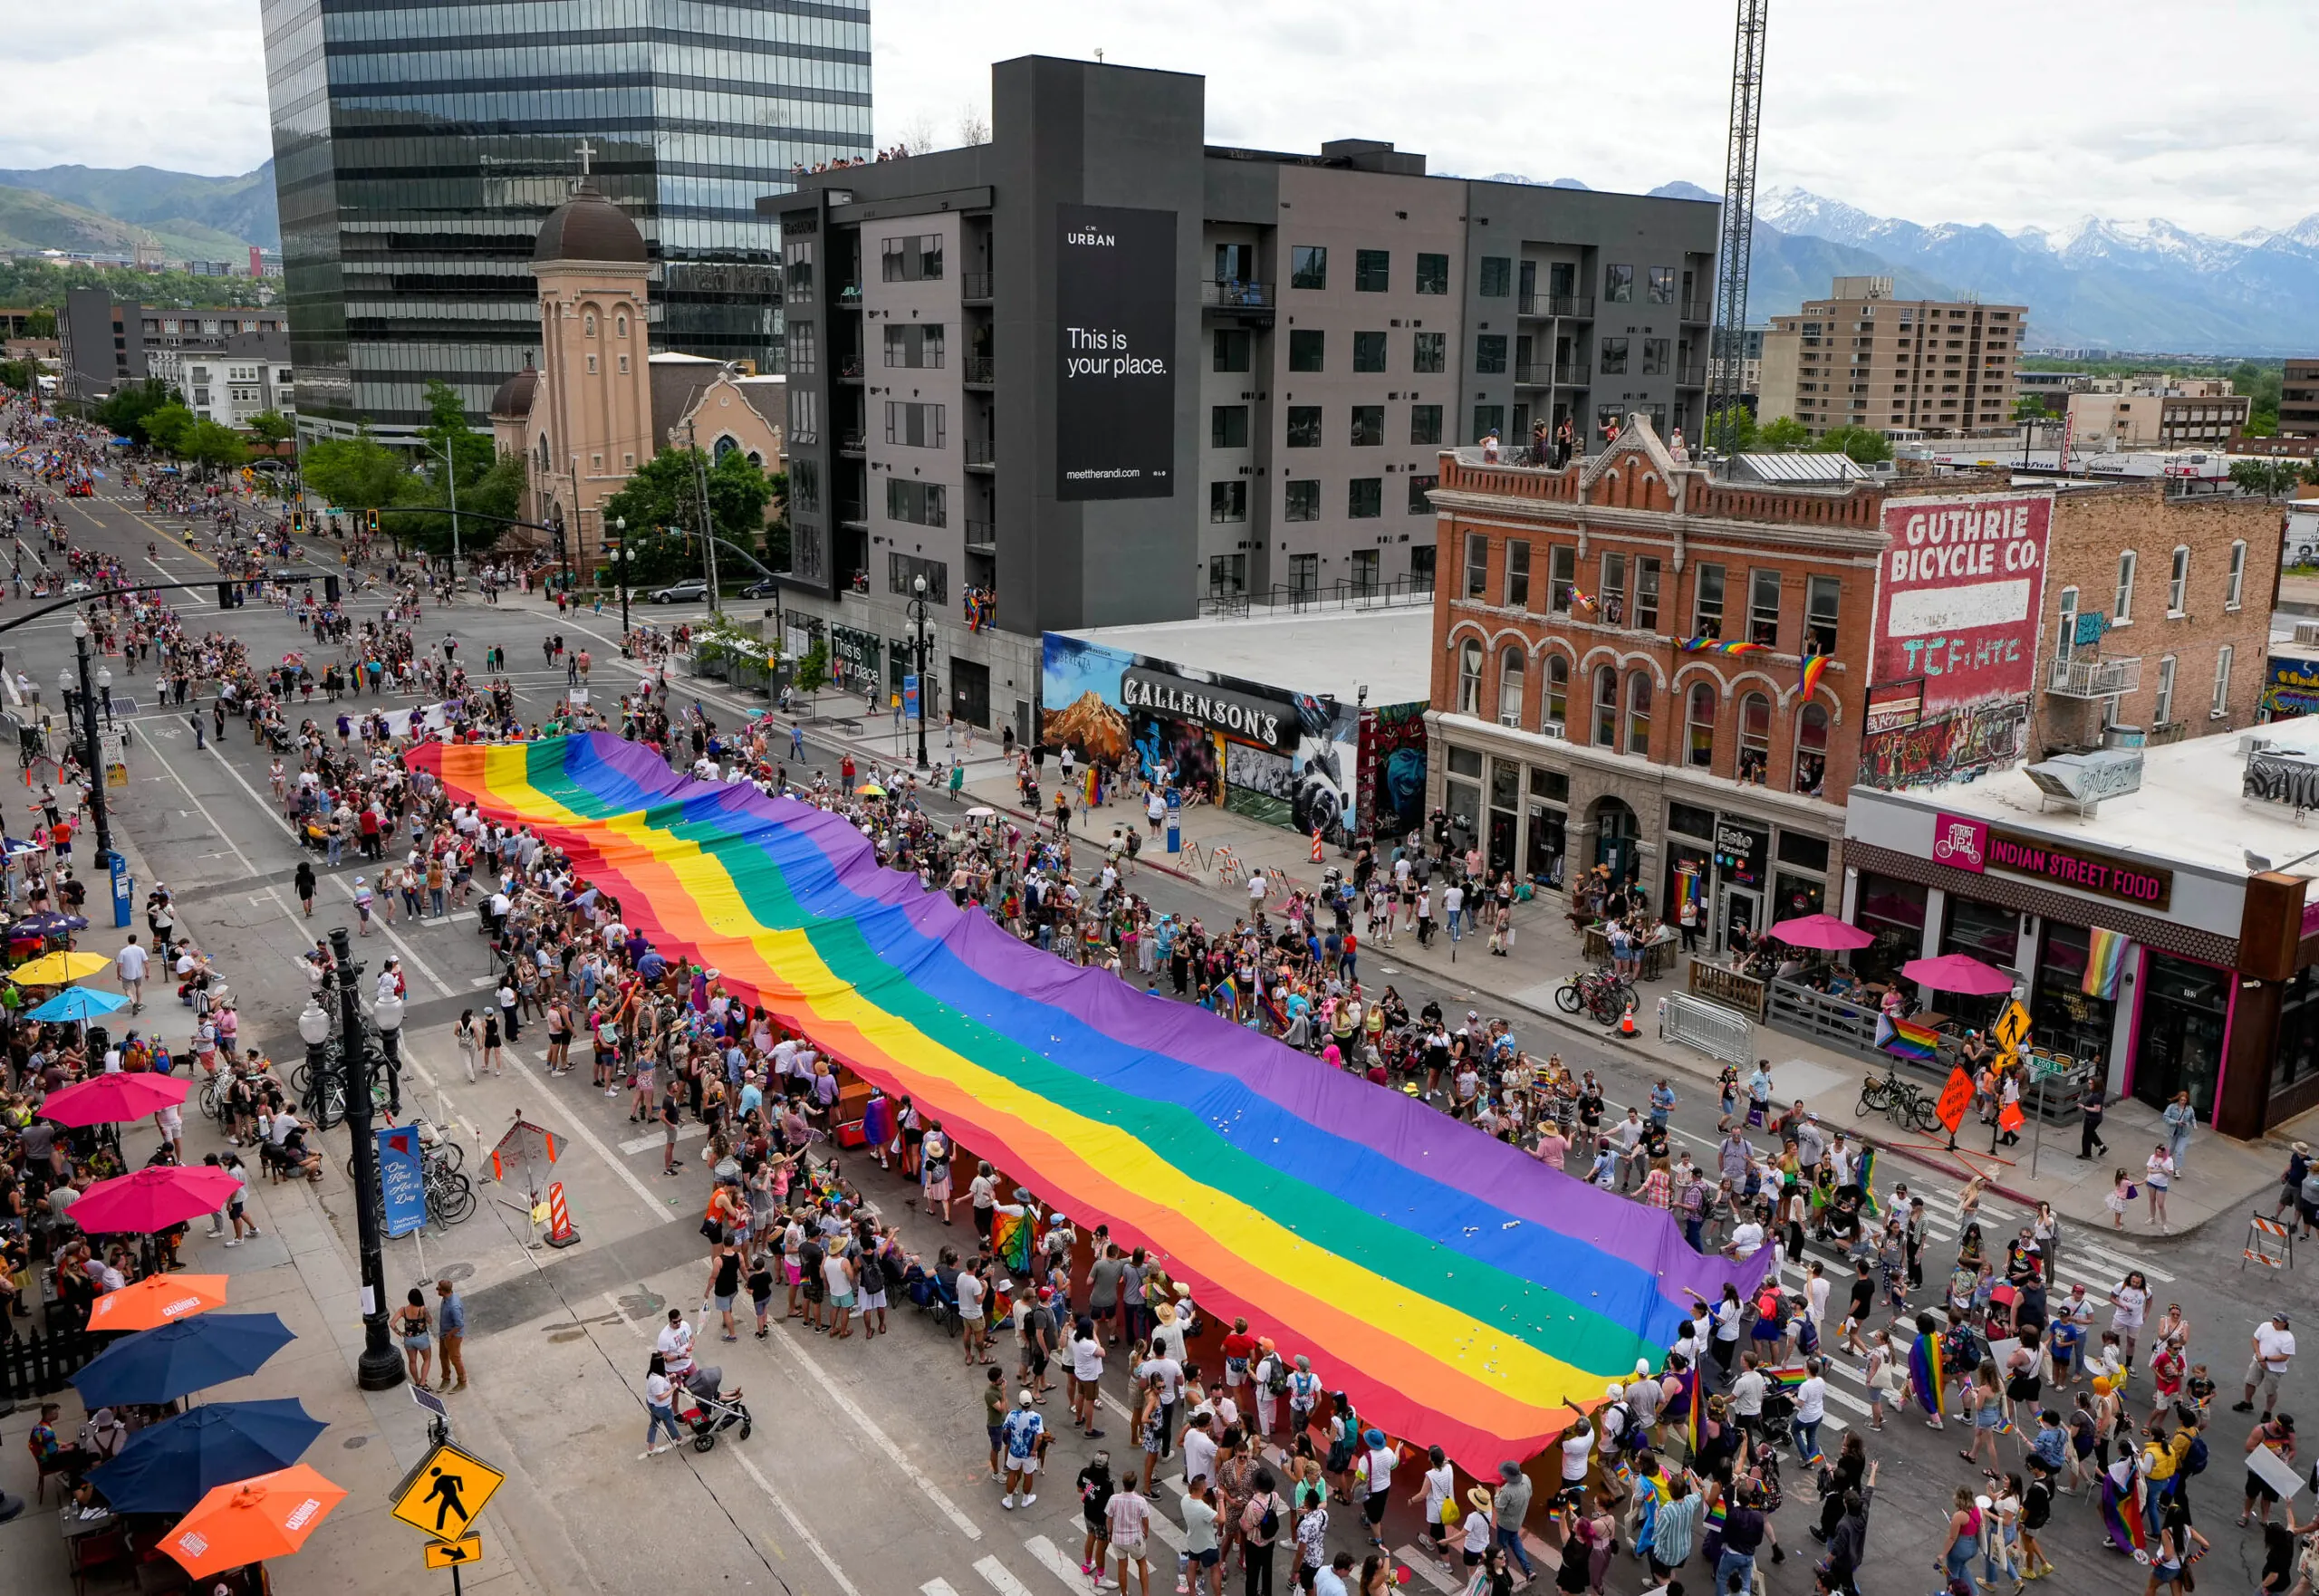 Salt Lake City, Utah has the highest LGBT population in the state.